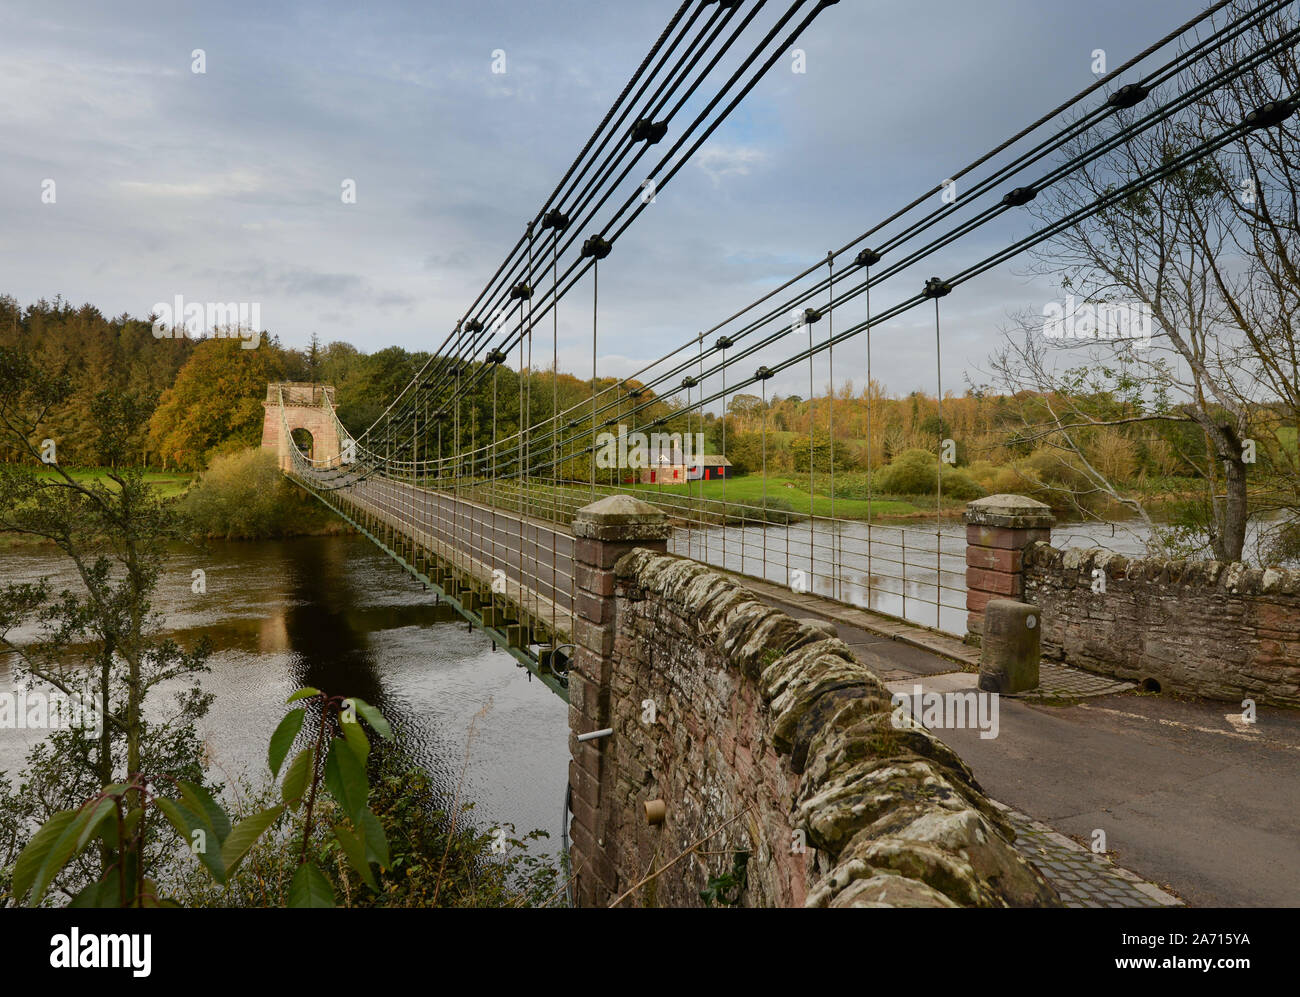 The Union Chain Bridge the oldest suspension bridge carrying traffic crossing the River Tweed and the English Scottish border. Stock Photo